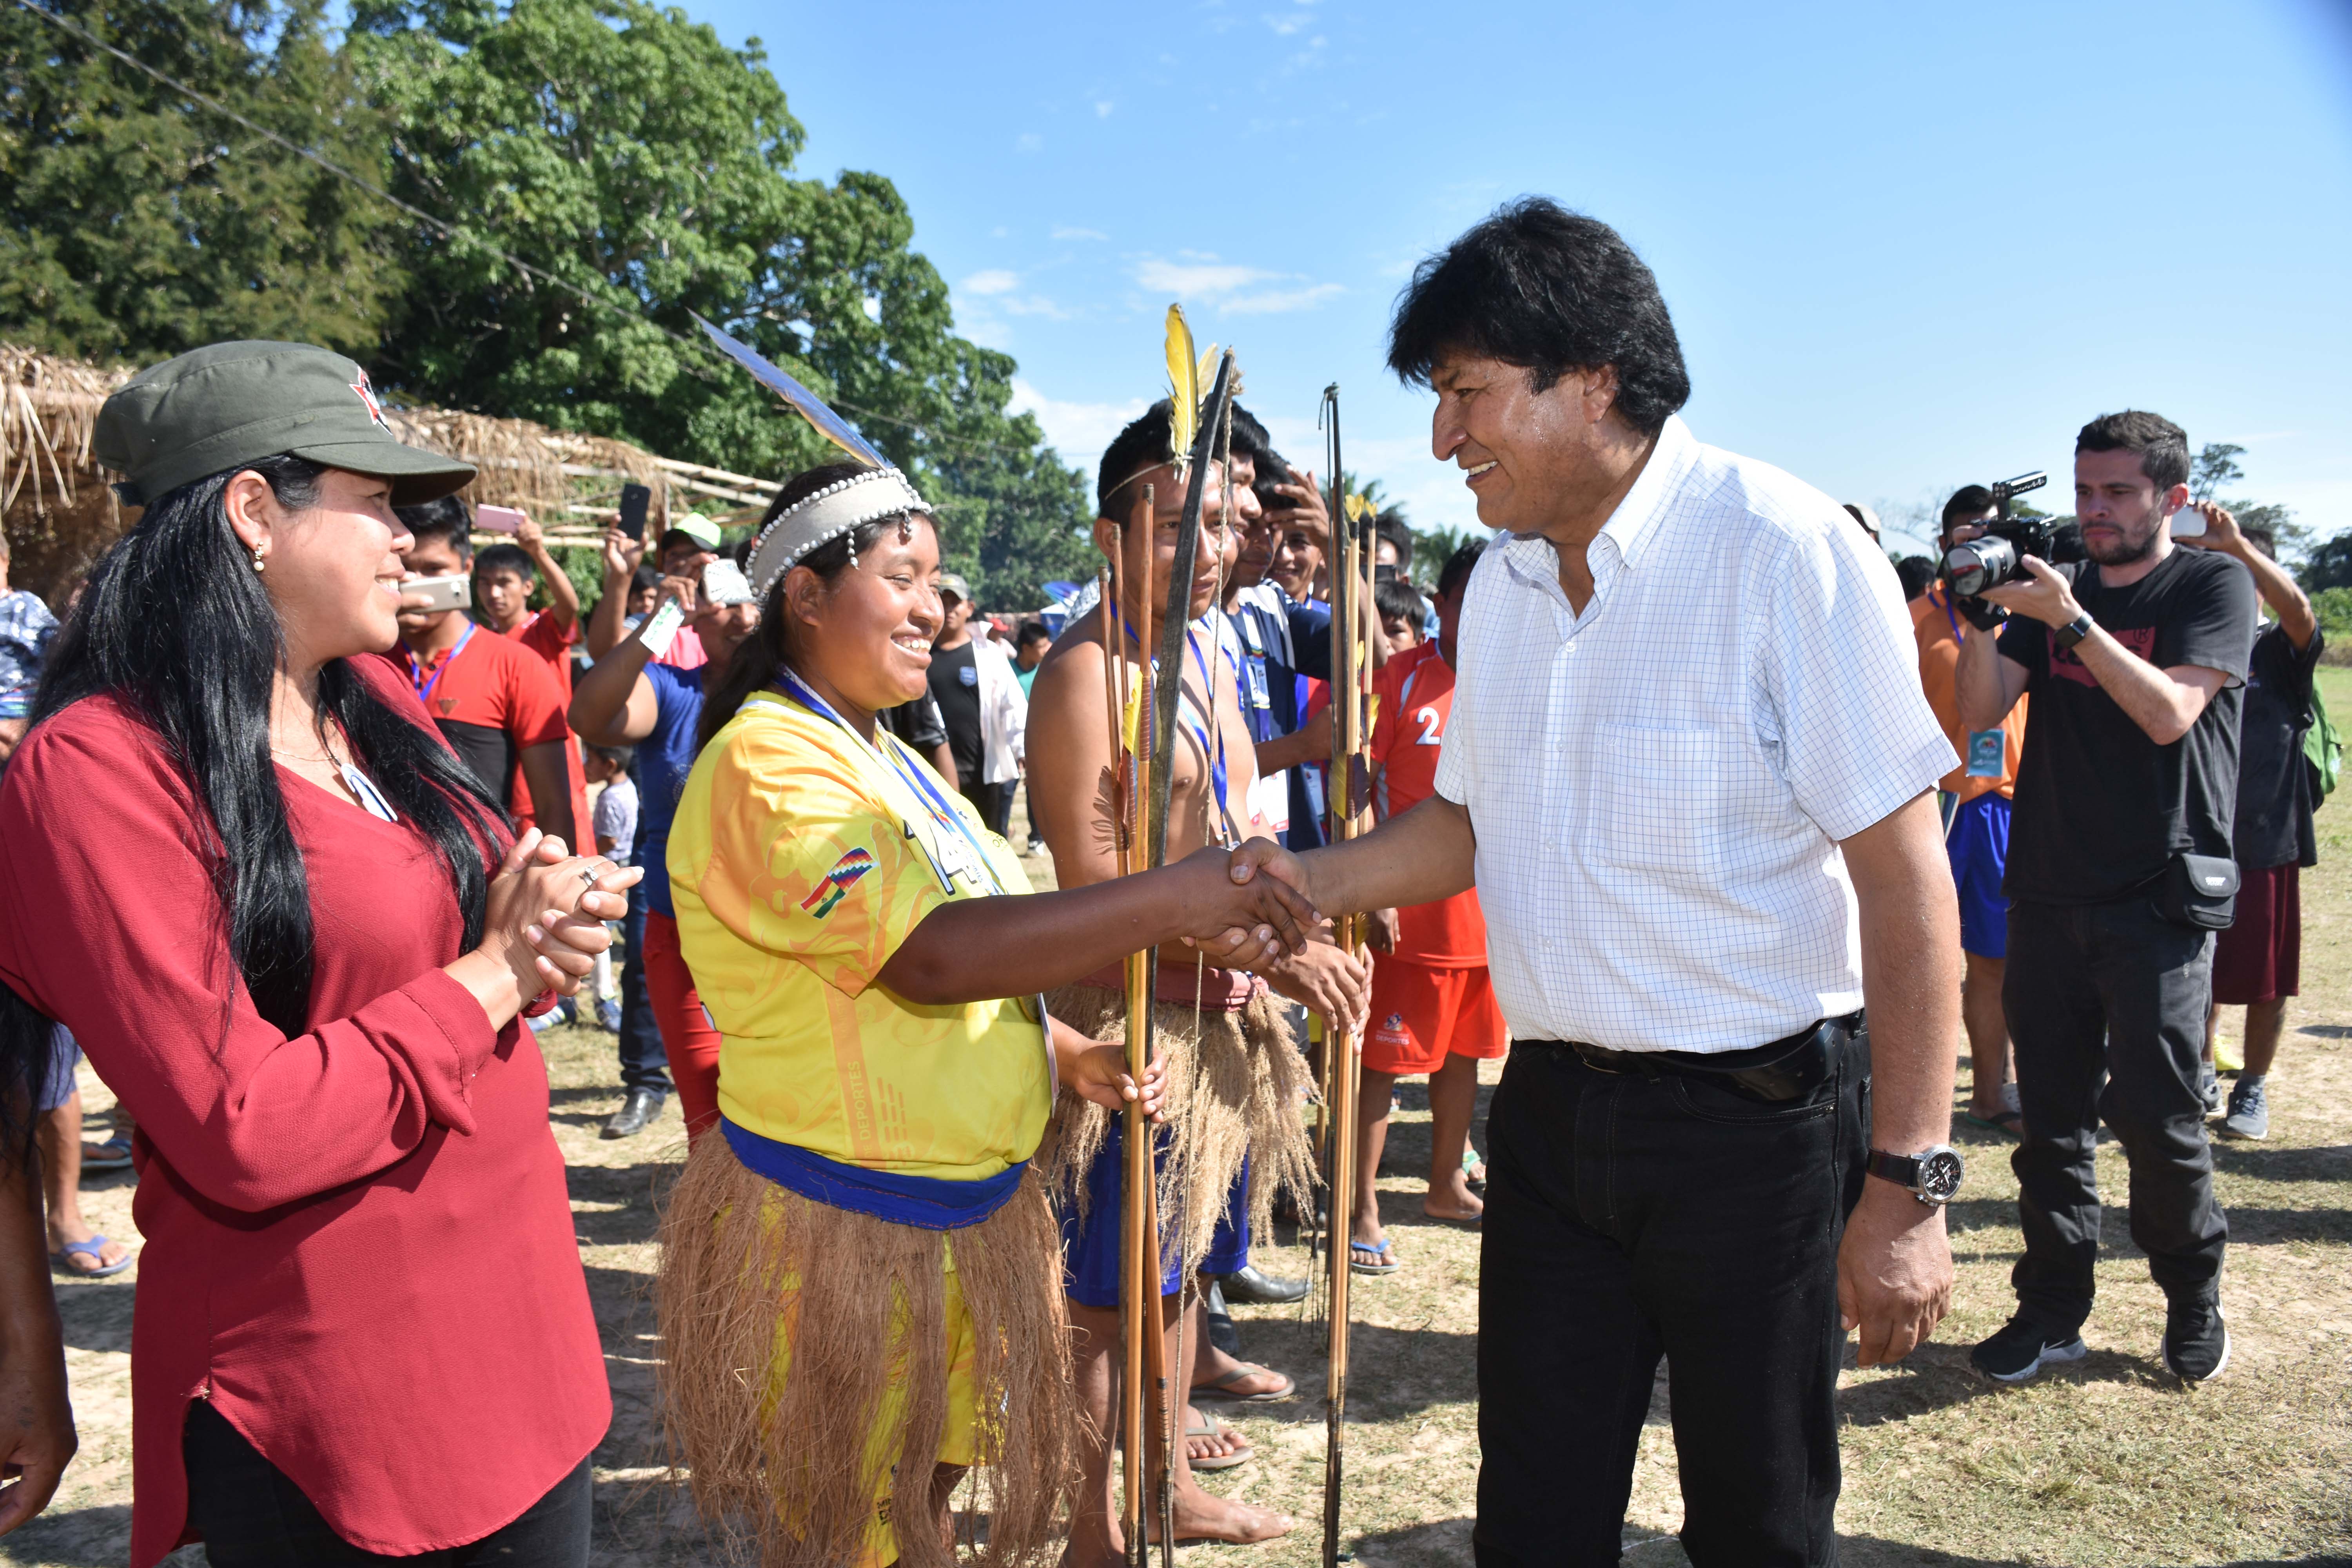 Evo Morales greets supporters at 'TIPNIS 2019', a sporting competition in the country's Amazon region.